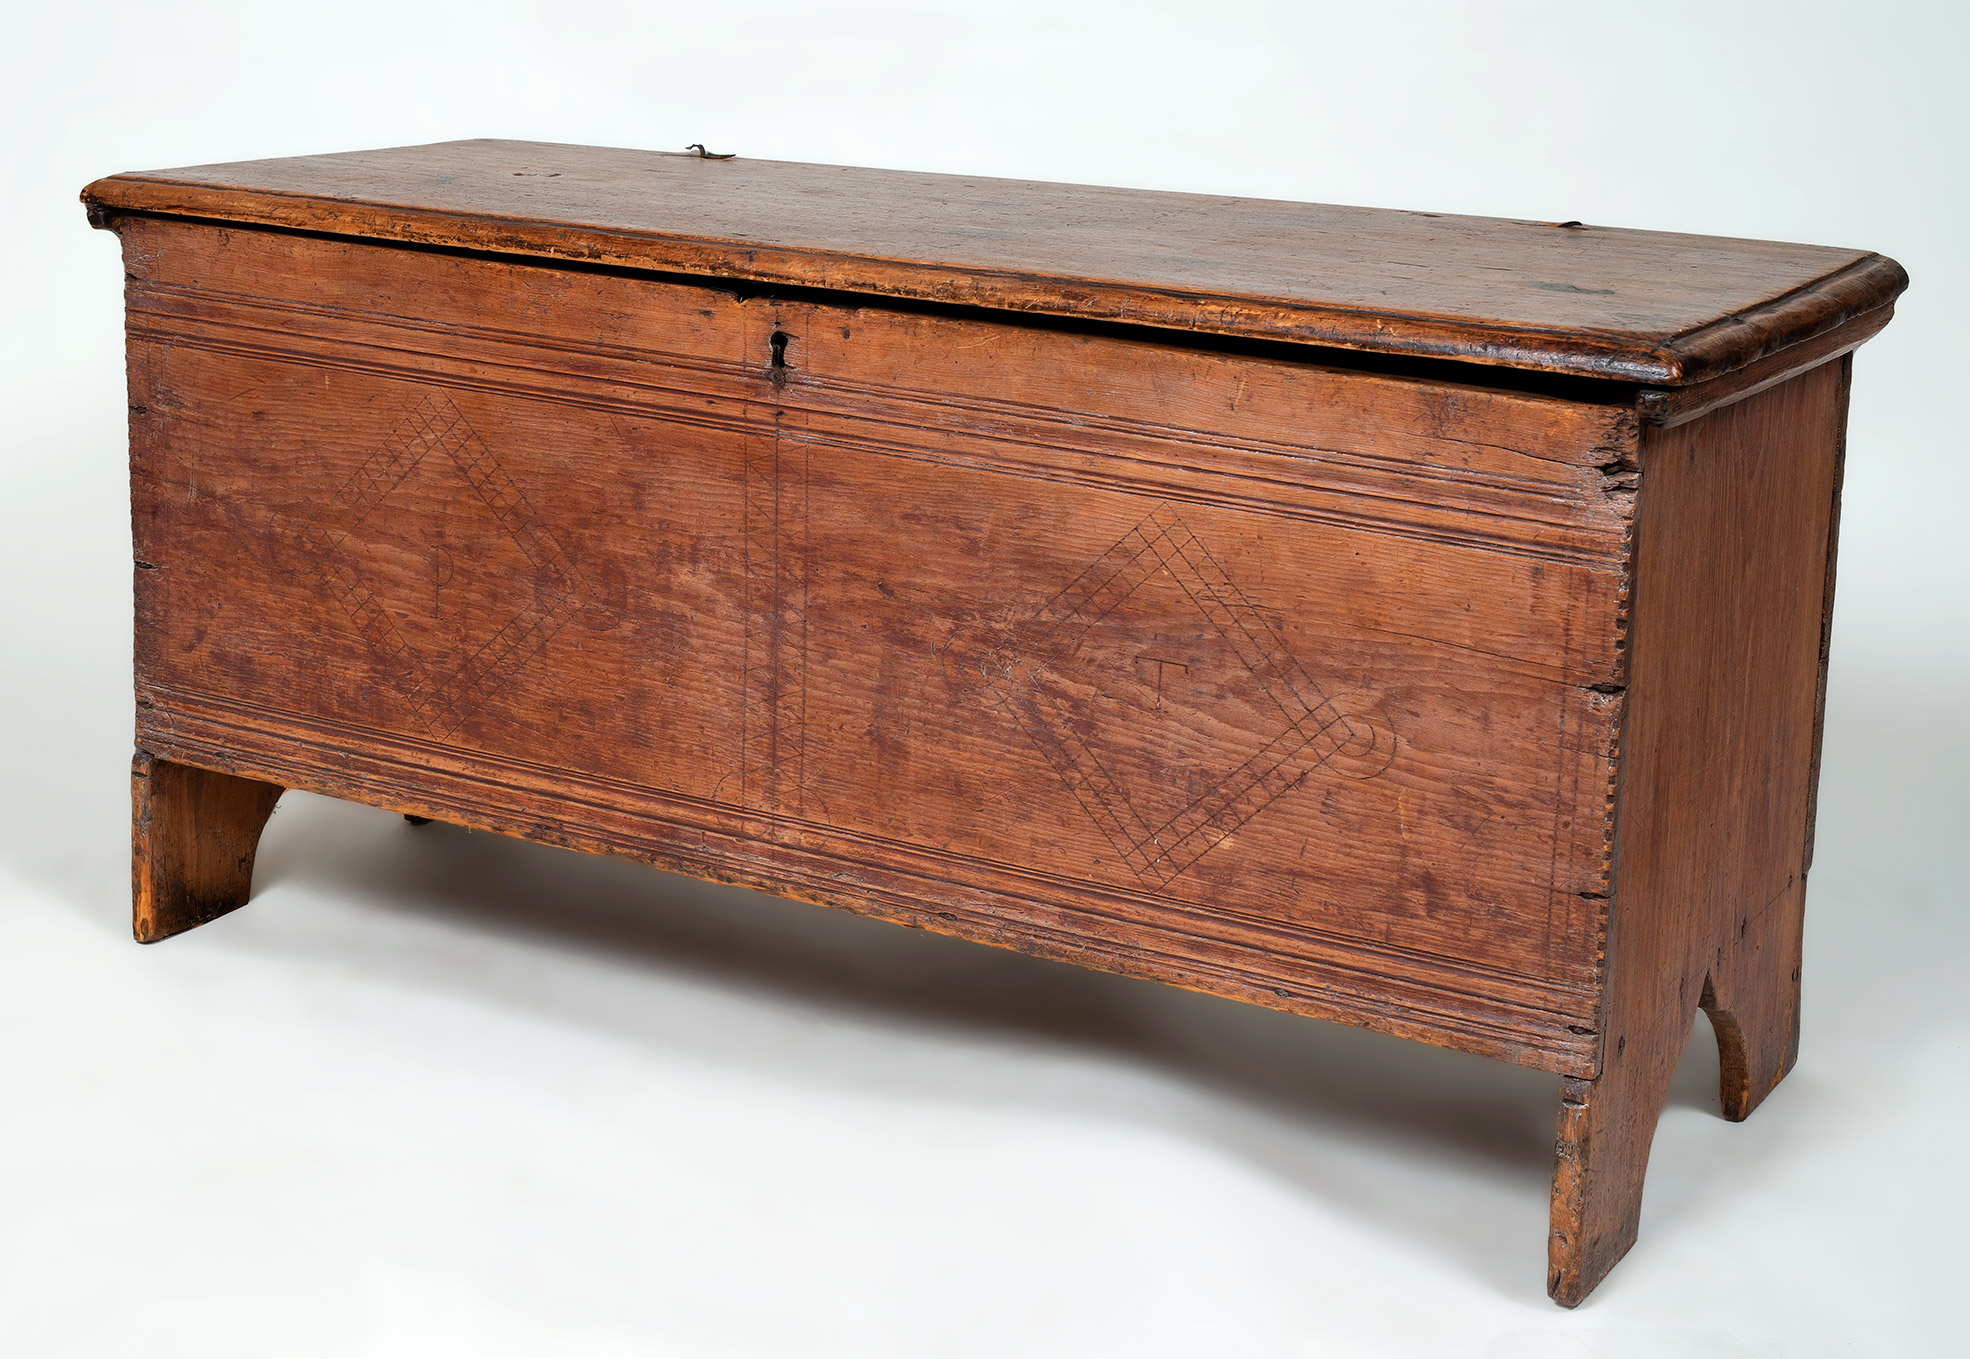 A very rare early New England six board chest